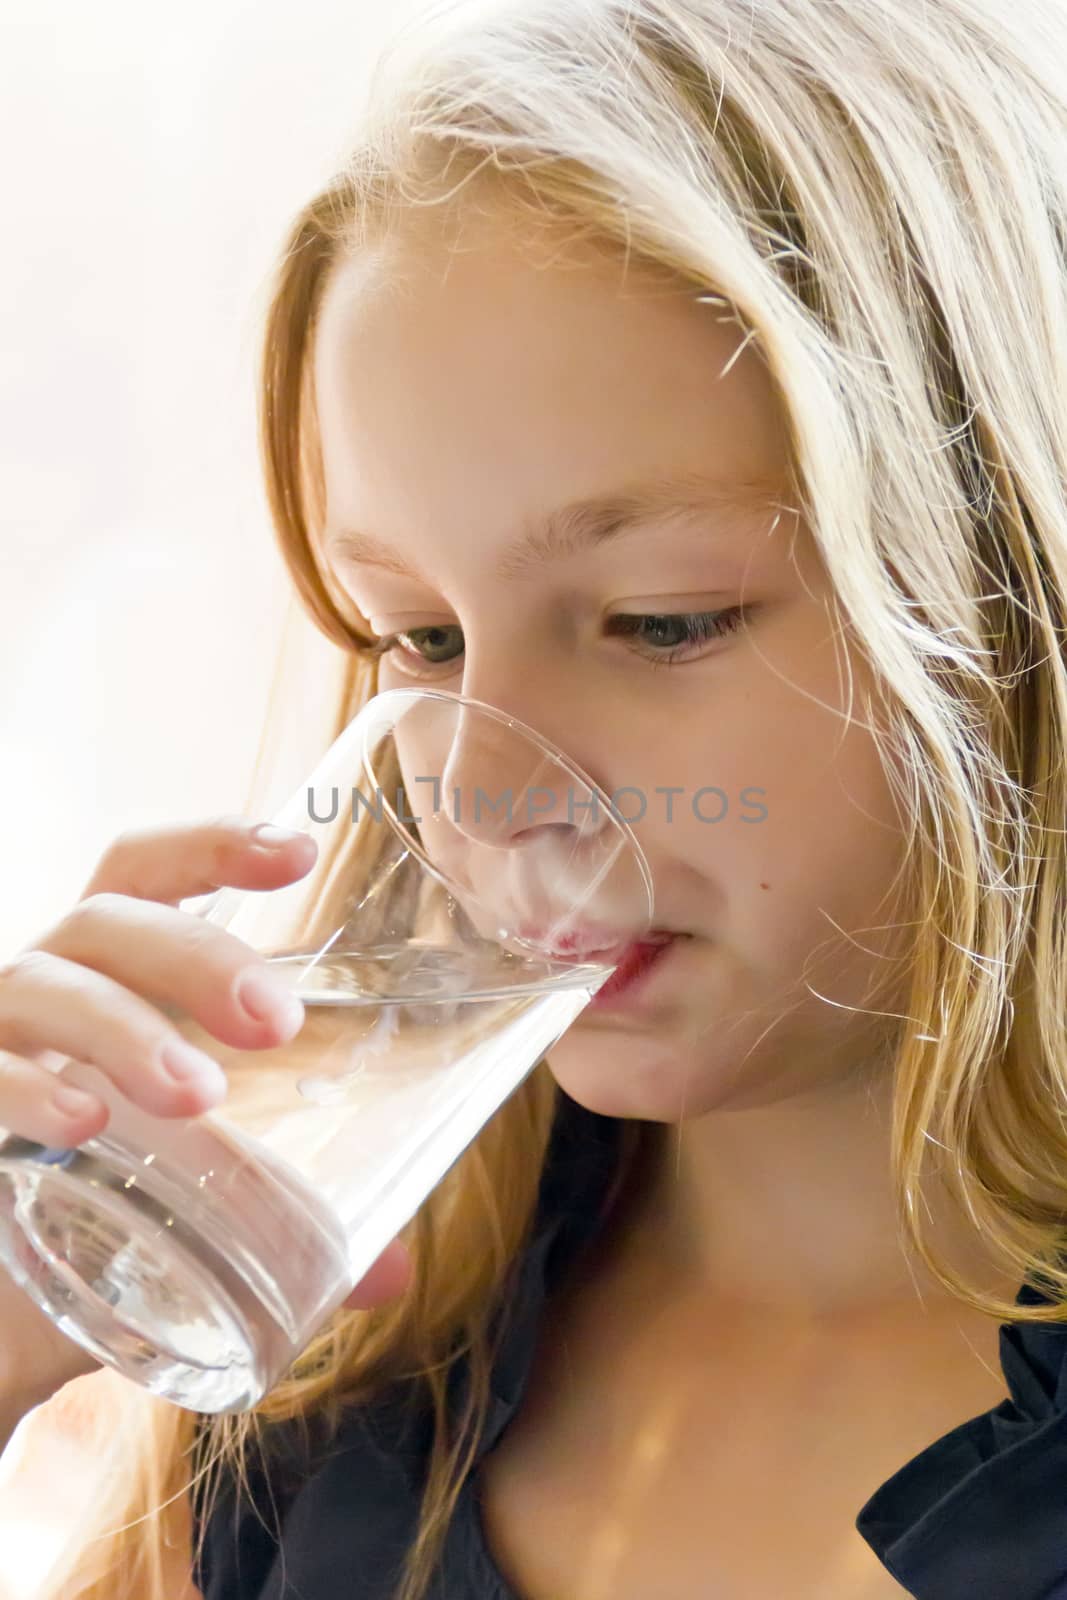 Cute girl with blond hair are drinking water